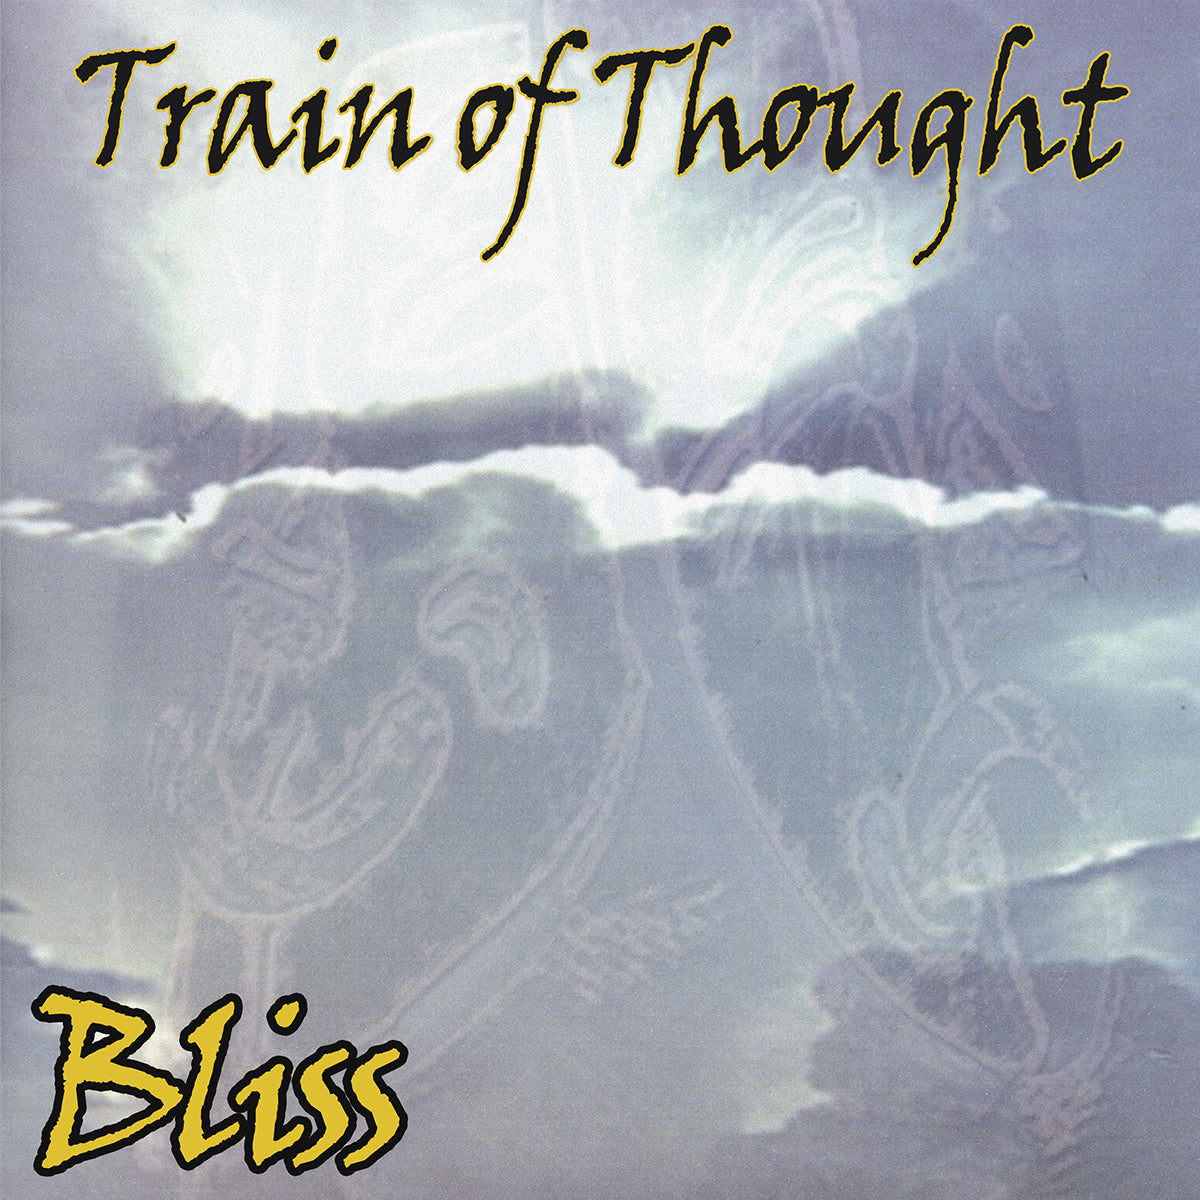 TRAIN OF THOUGHT "Bliss" 10"